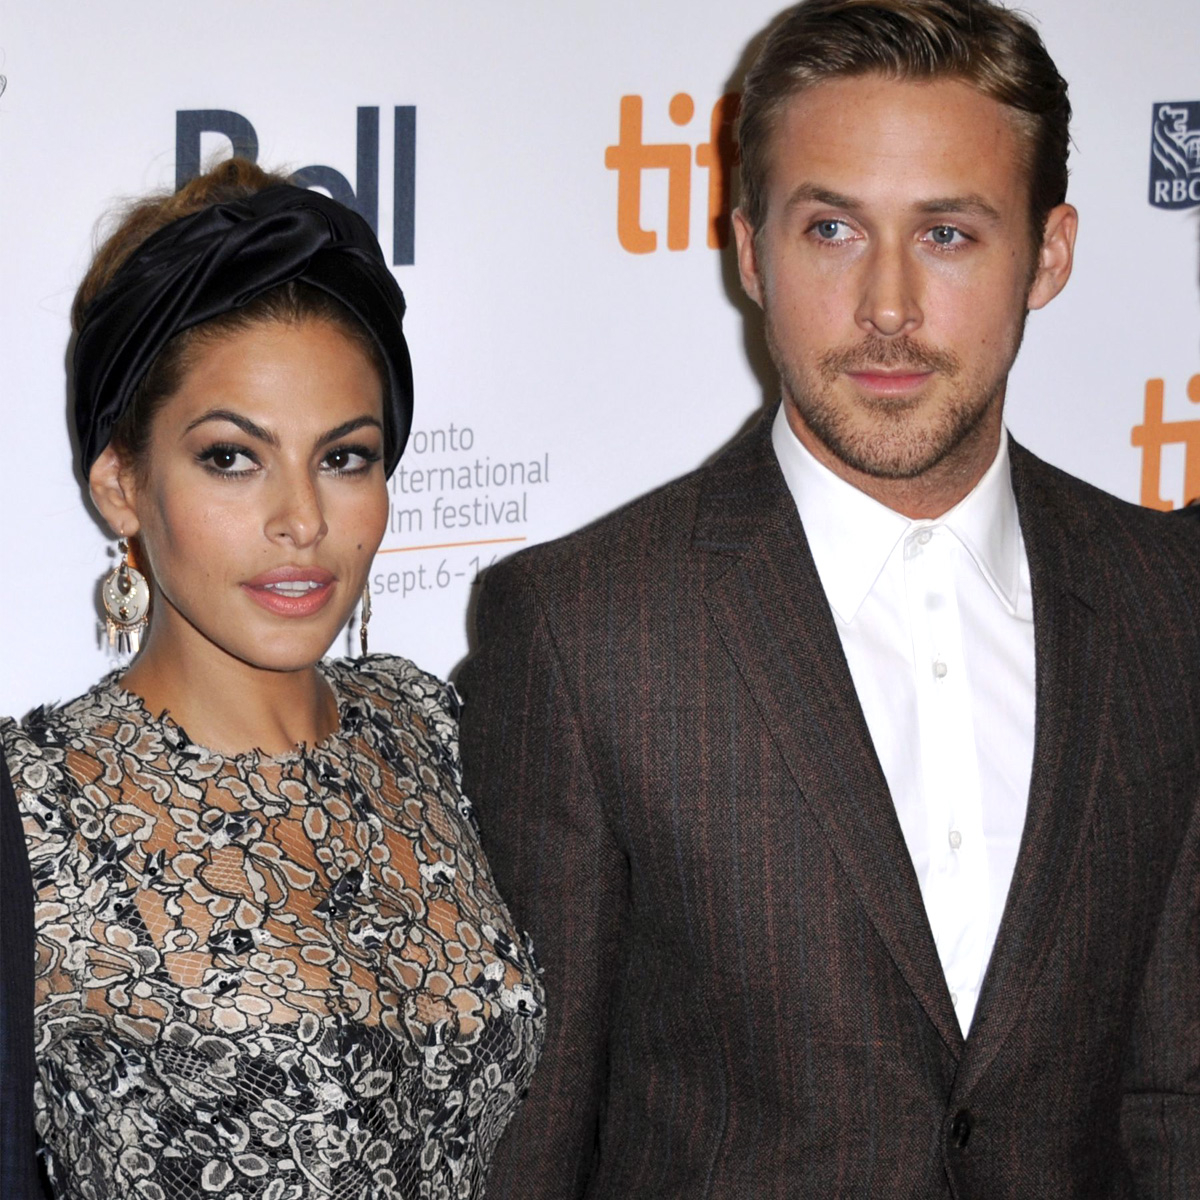 Eva Mendes Shares Ryan Gosling Is “An Incredible Cook”